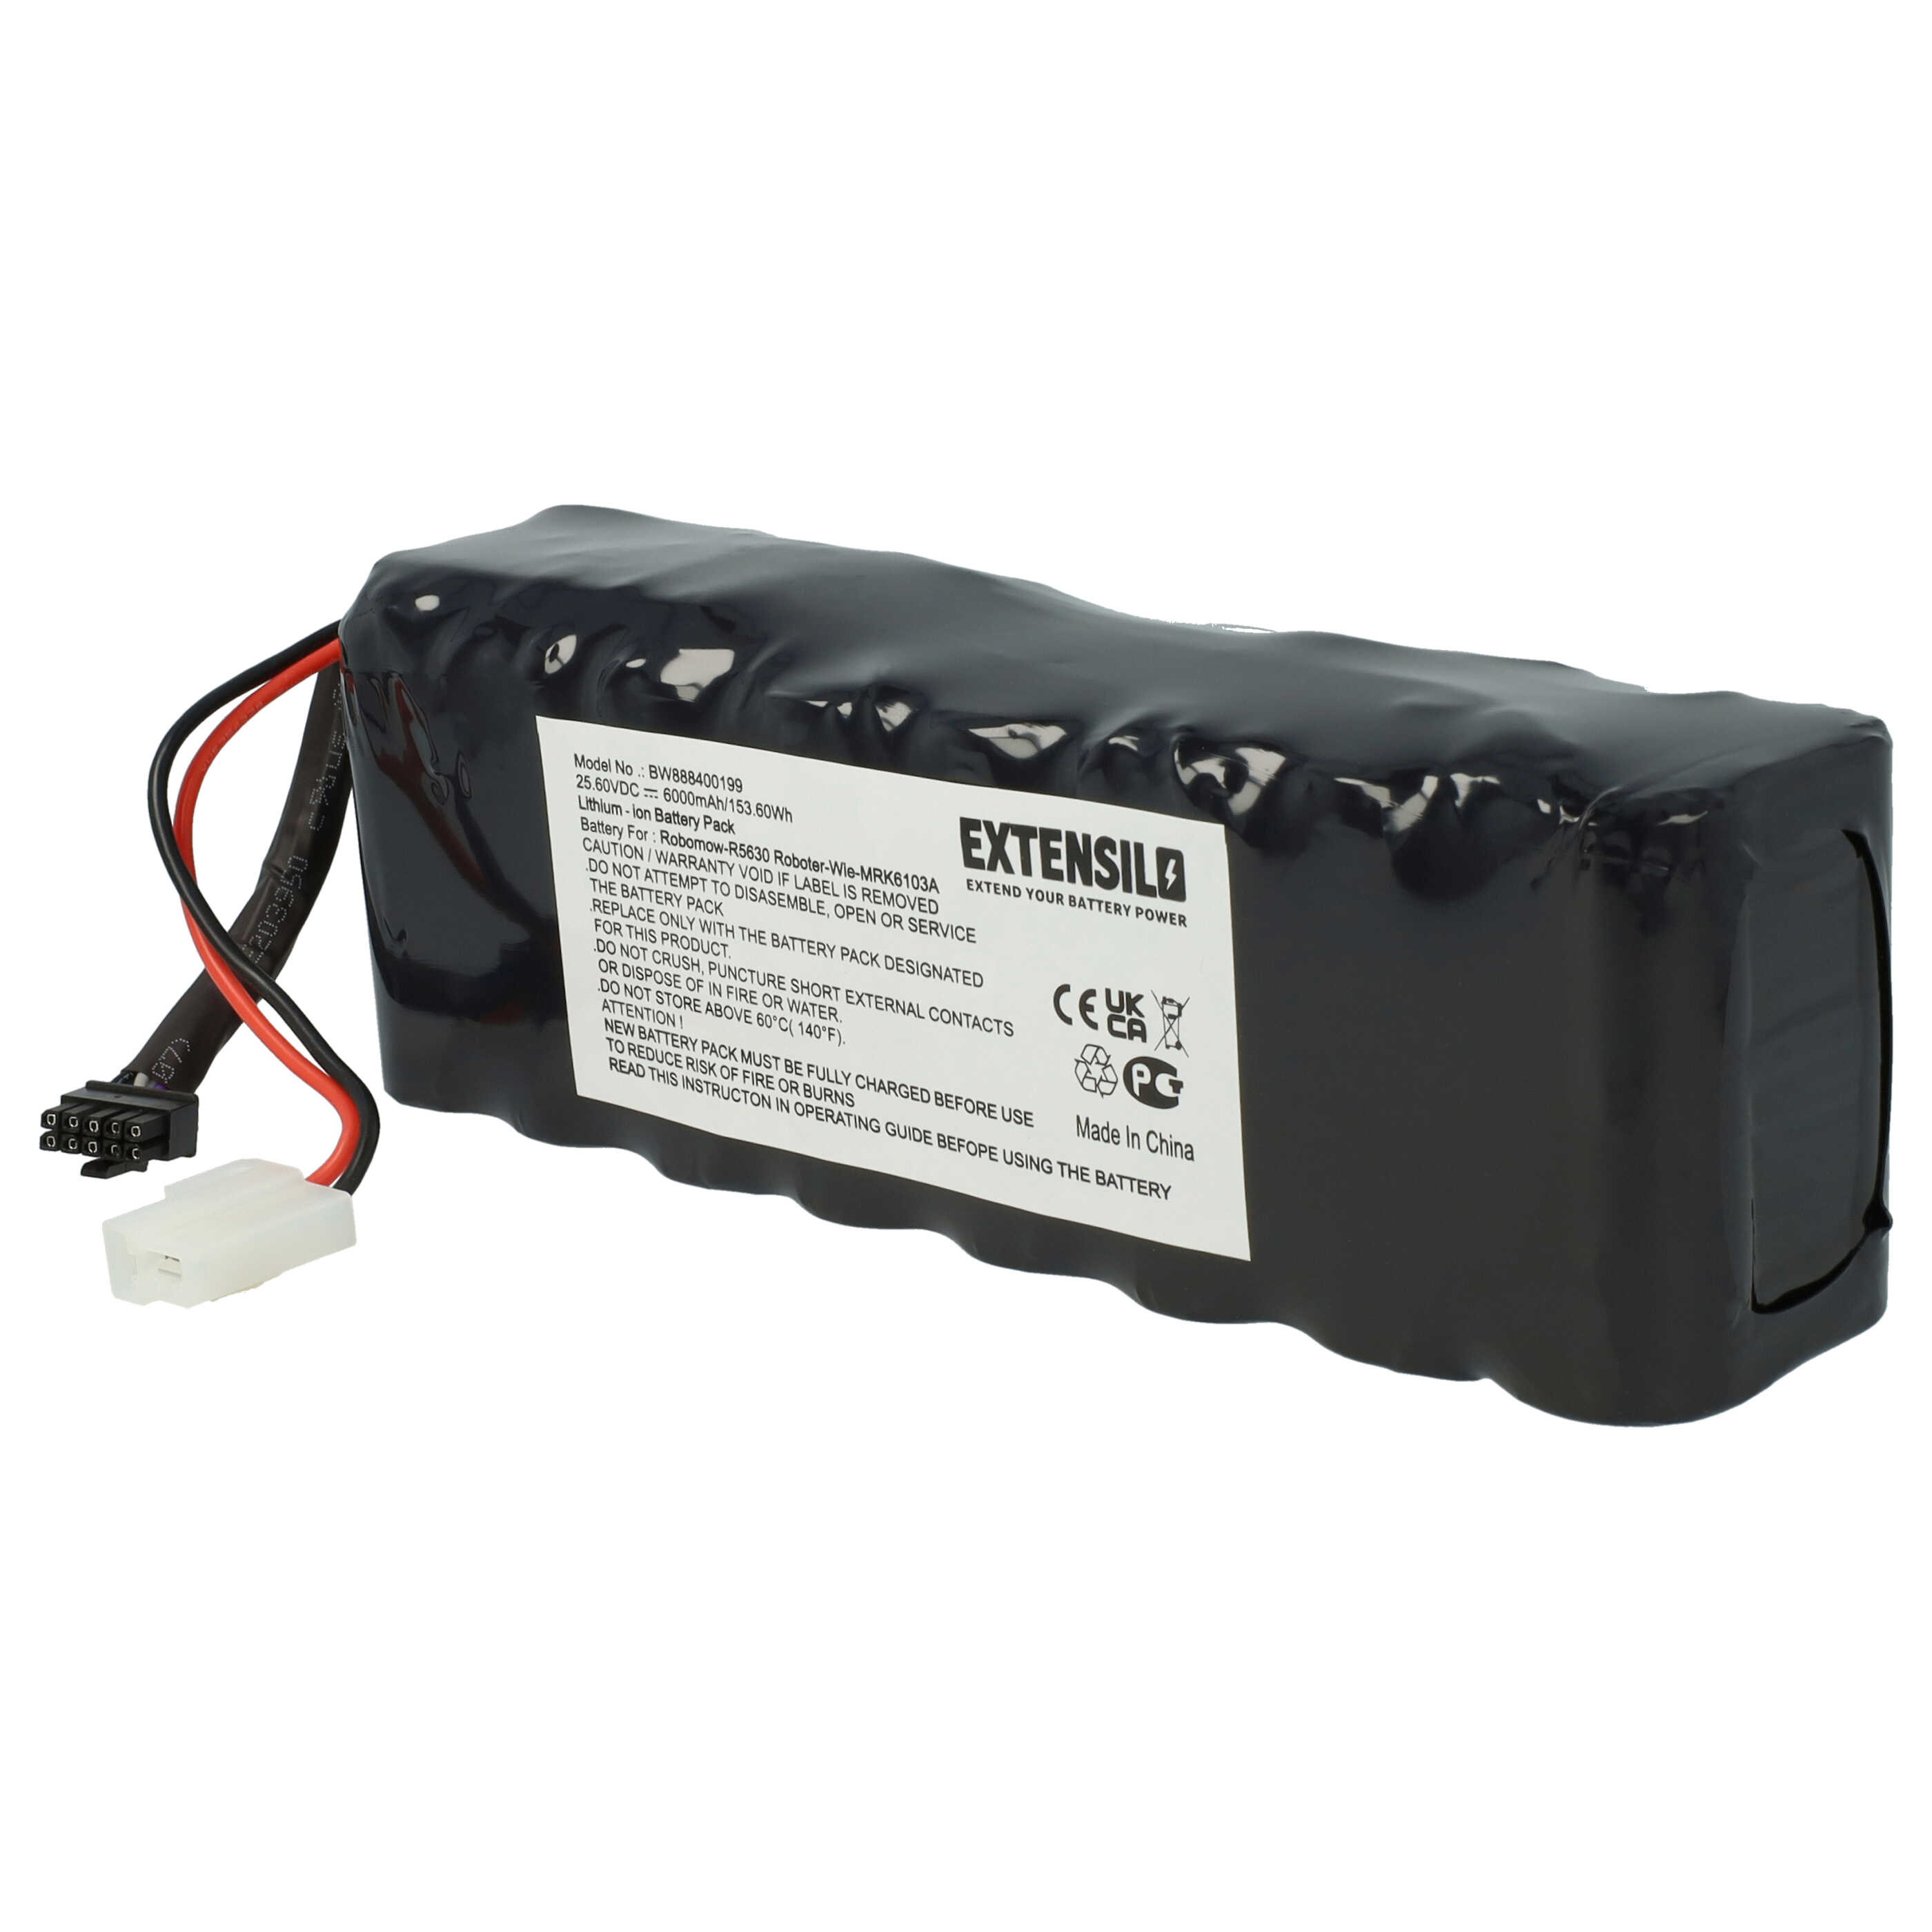 Lawnmower Battery Replacement for Robomow MRK6105A - 6000mAh 25.6V Li-Ion